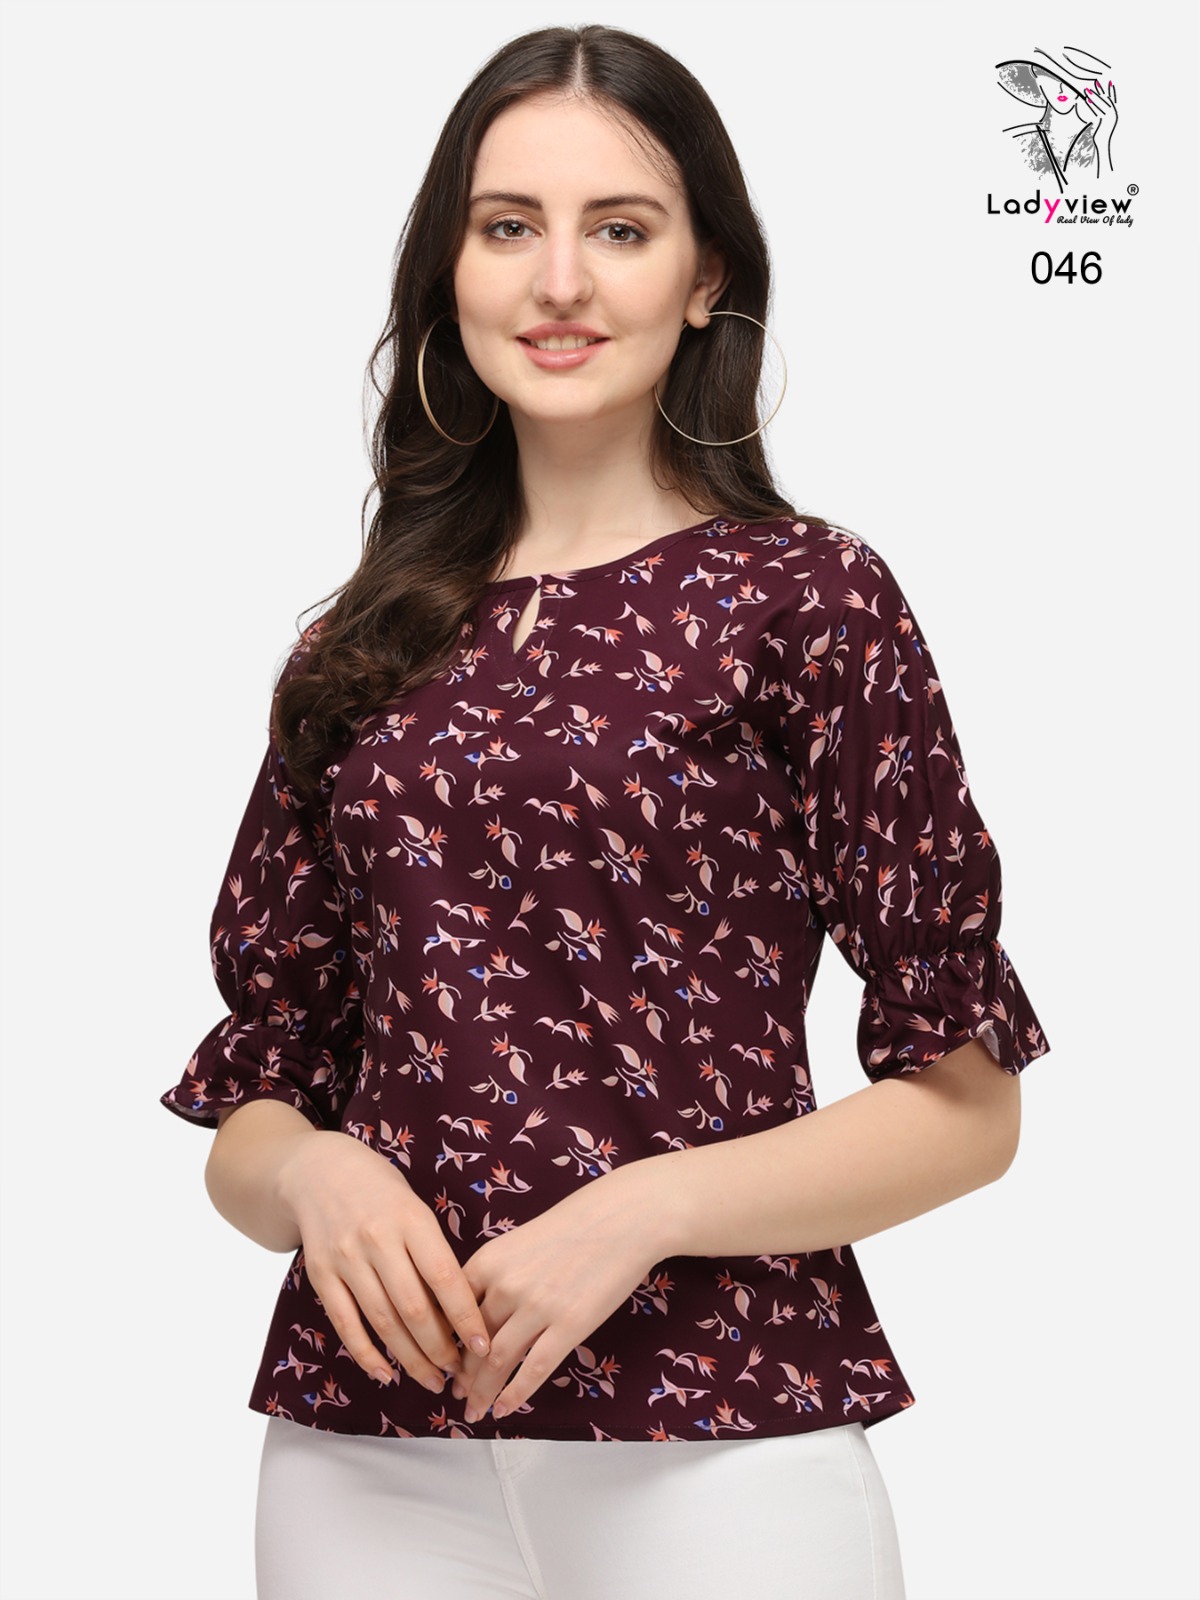 ladyview topsy remix 4 crape new and modern style top catalog